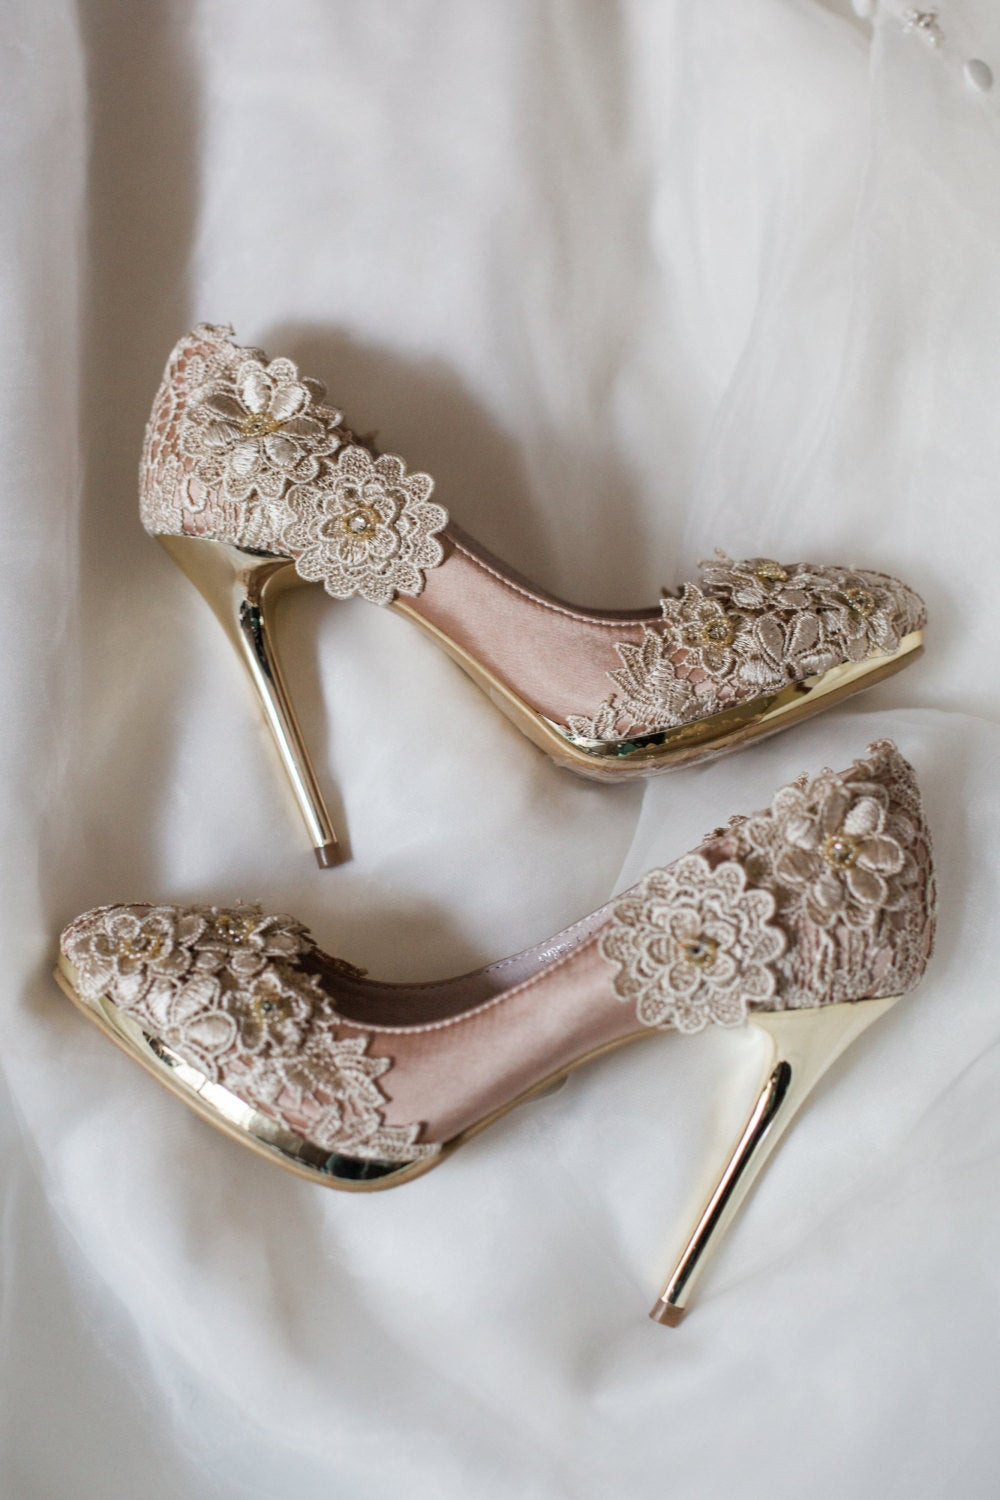 Shoes Wedding
 SALE Vintage Flower Lace Wedding Shoes with Champagne Gold